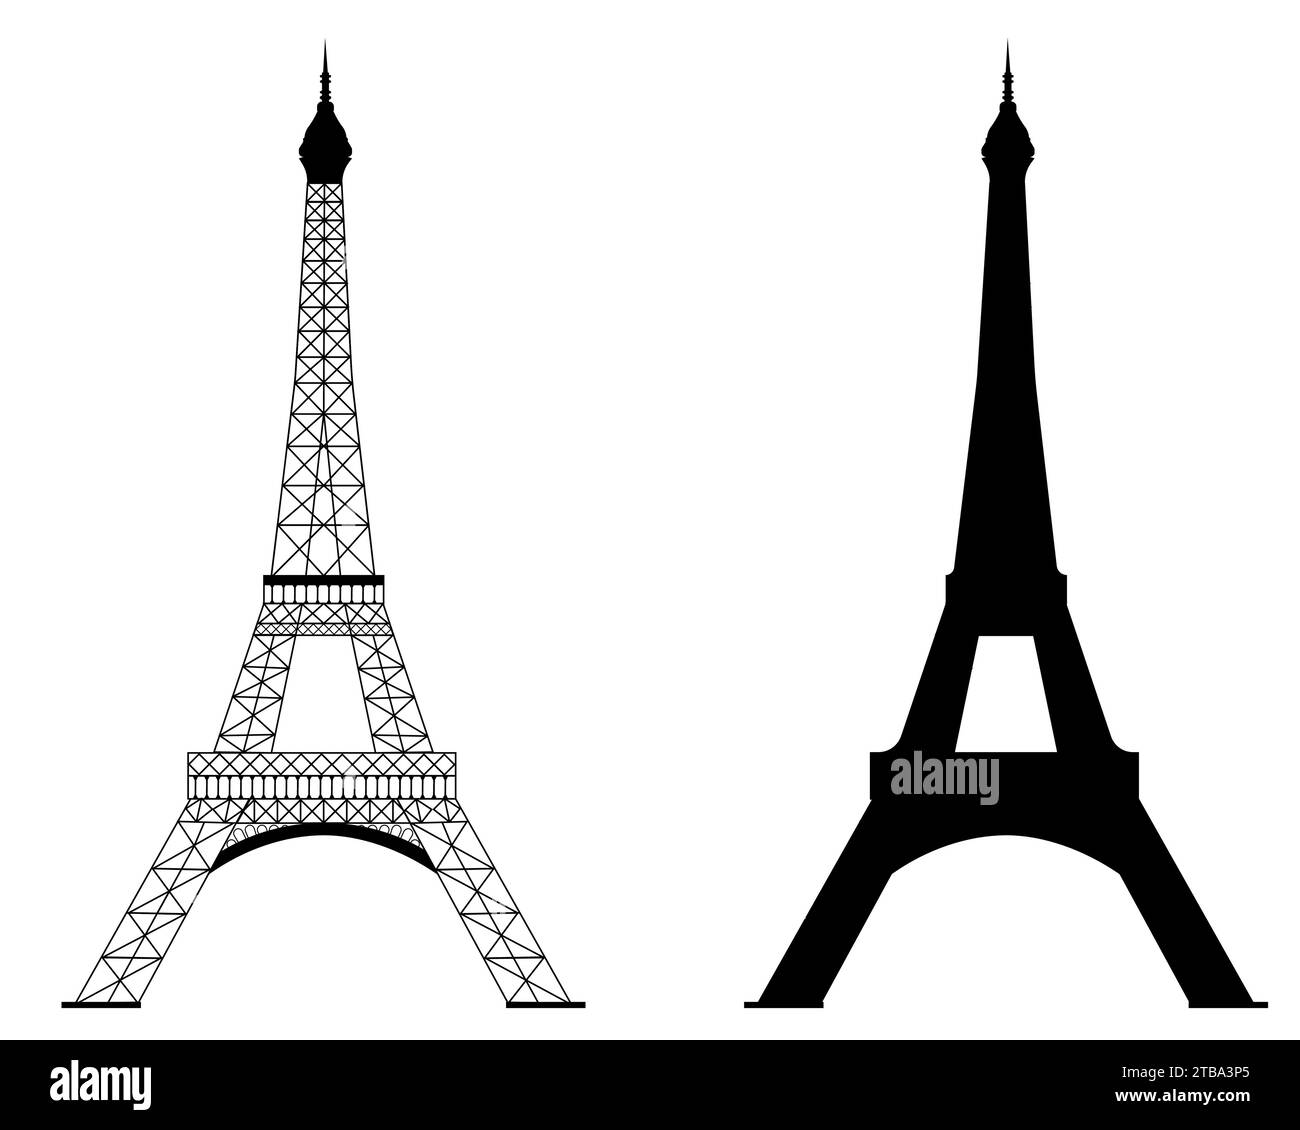 Eiffel tower vector illustration on the white background Stock Vector